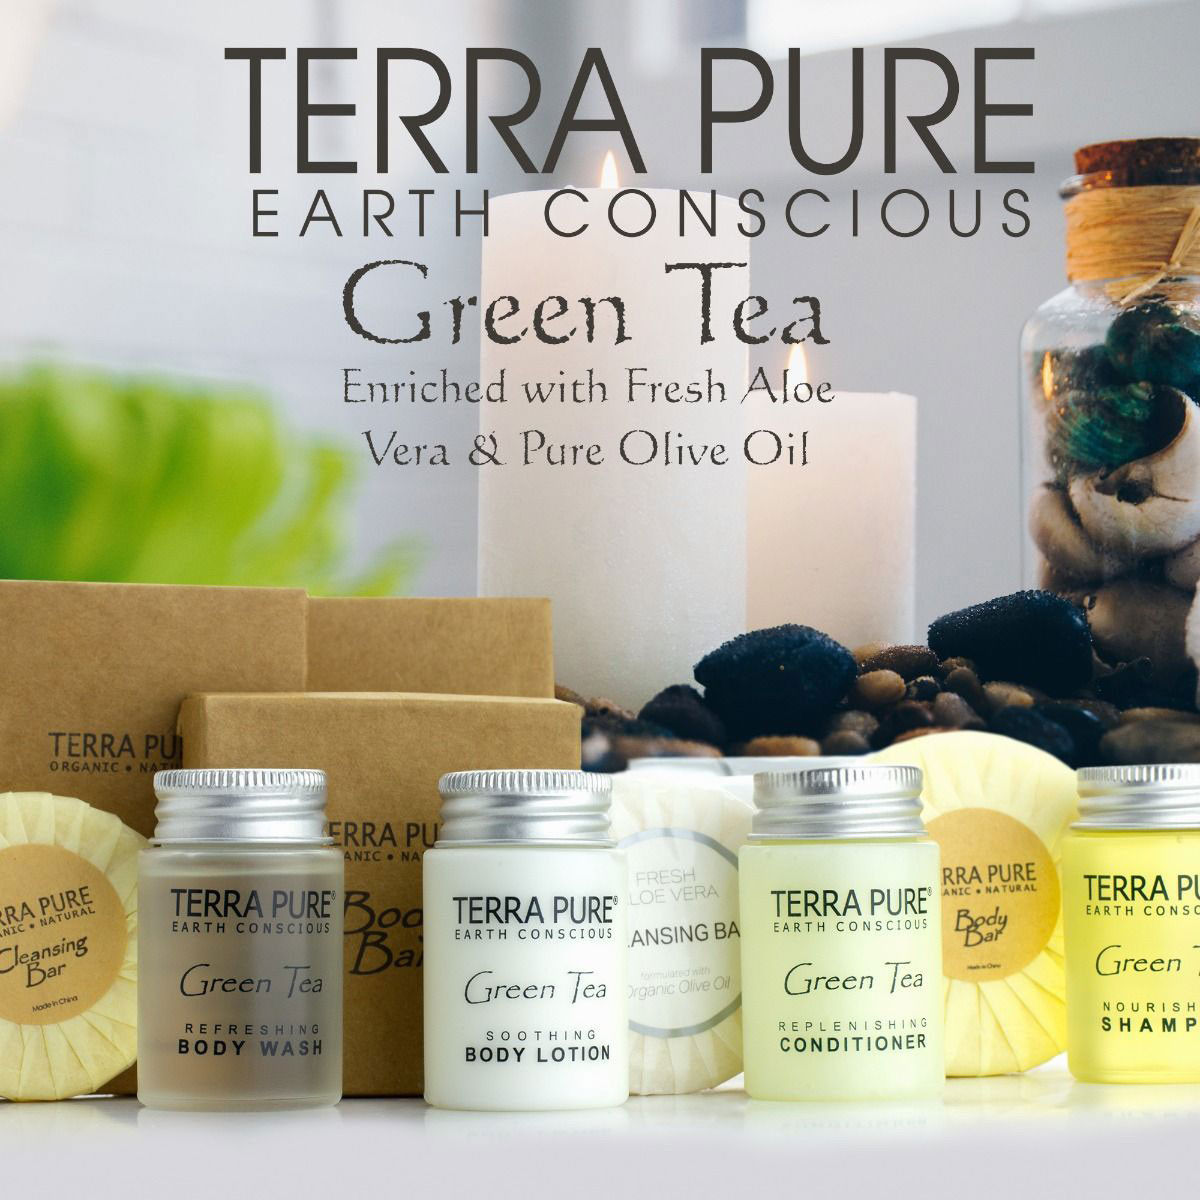 What does the terra pure Personal Care Kit include in the TERRA PURE GREEN TEA Collection?